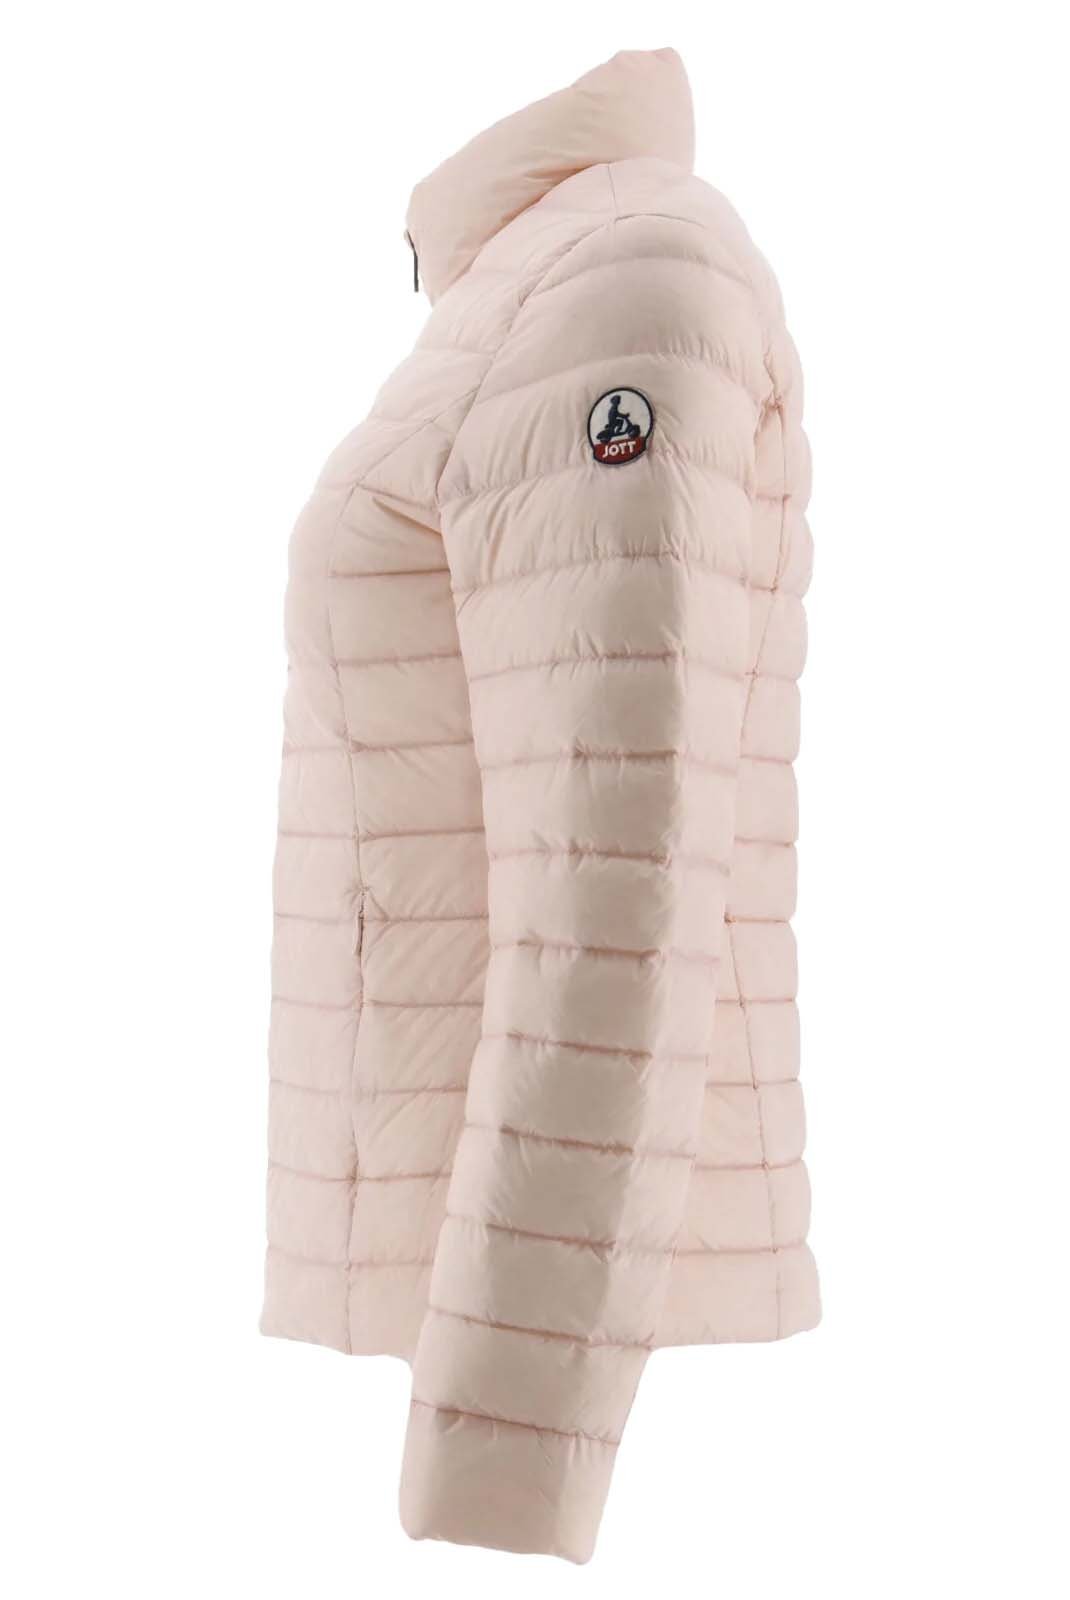 Blouson / doudoune  Just over the top CHA 463 SOFT PINK